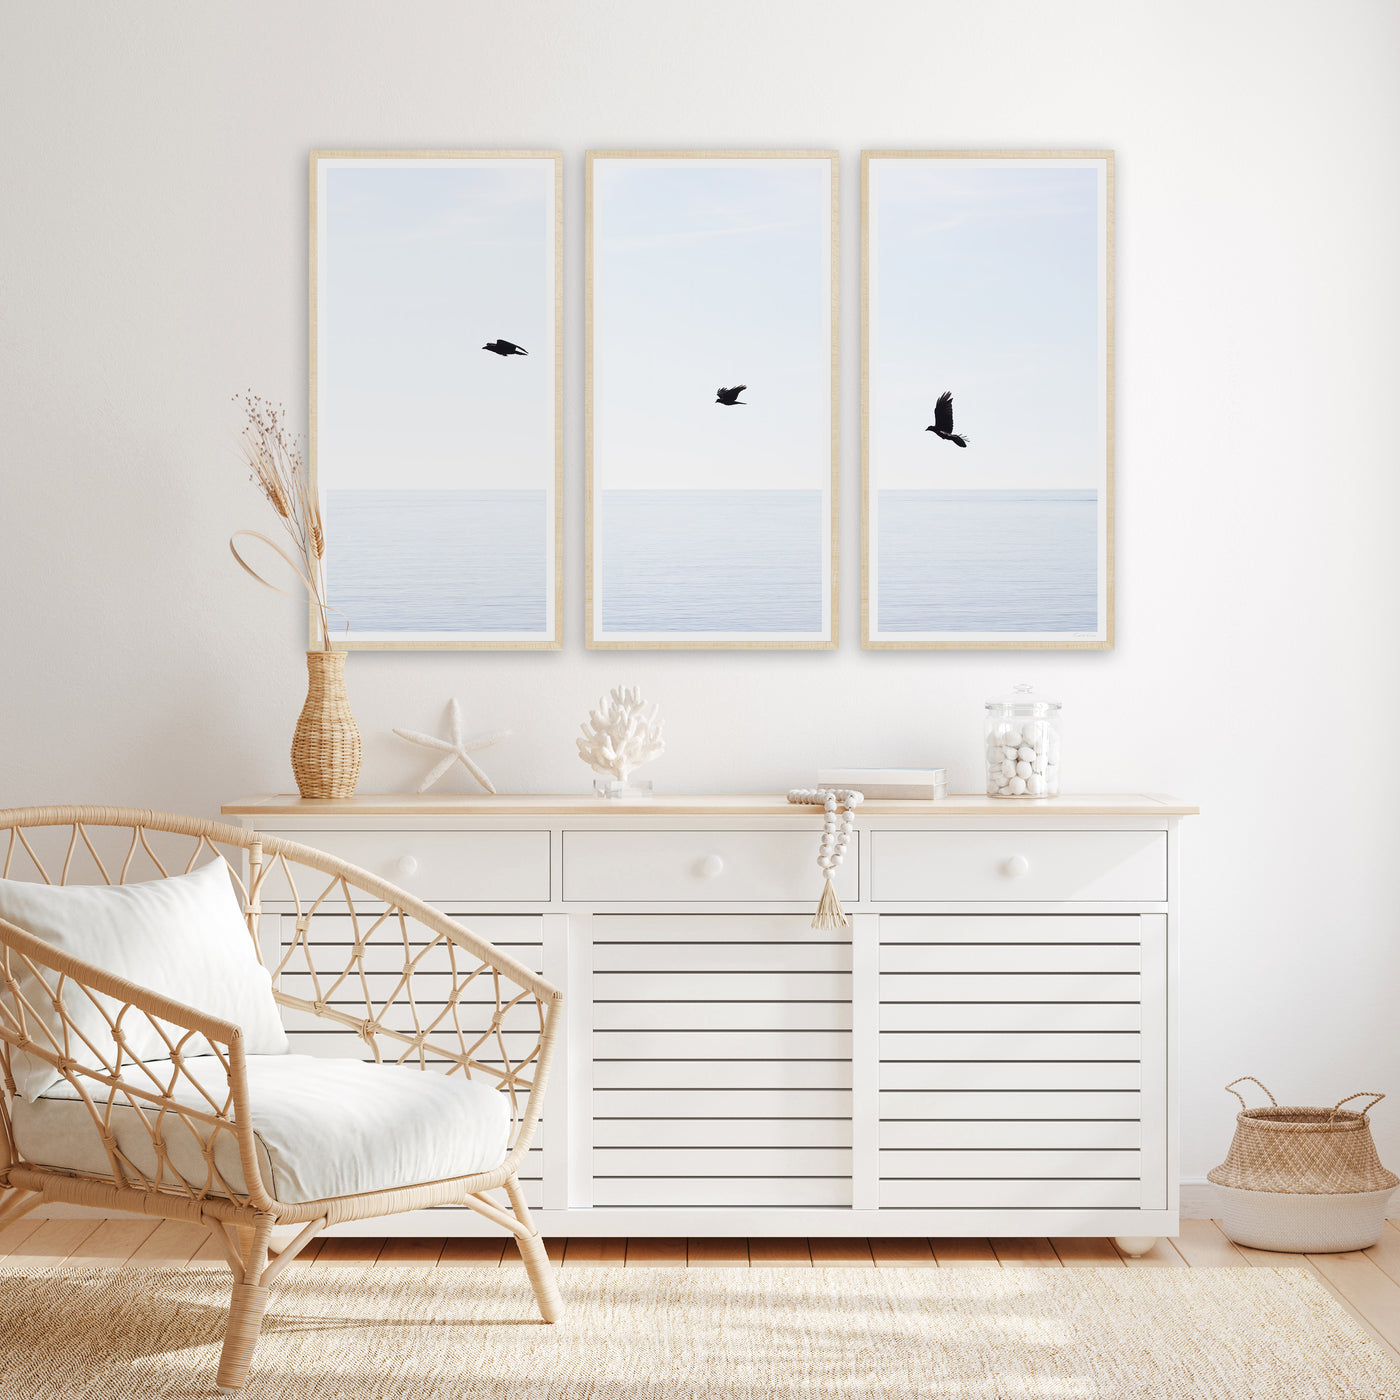 Three Birds - Triptych prints by Cattie Coyle Photography in beach house